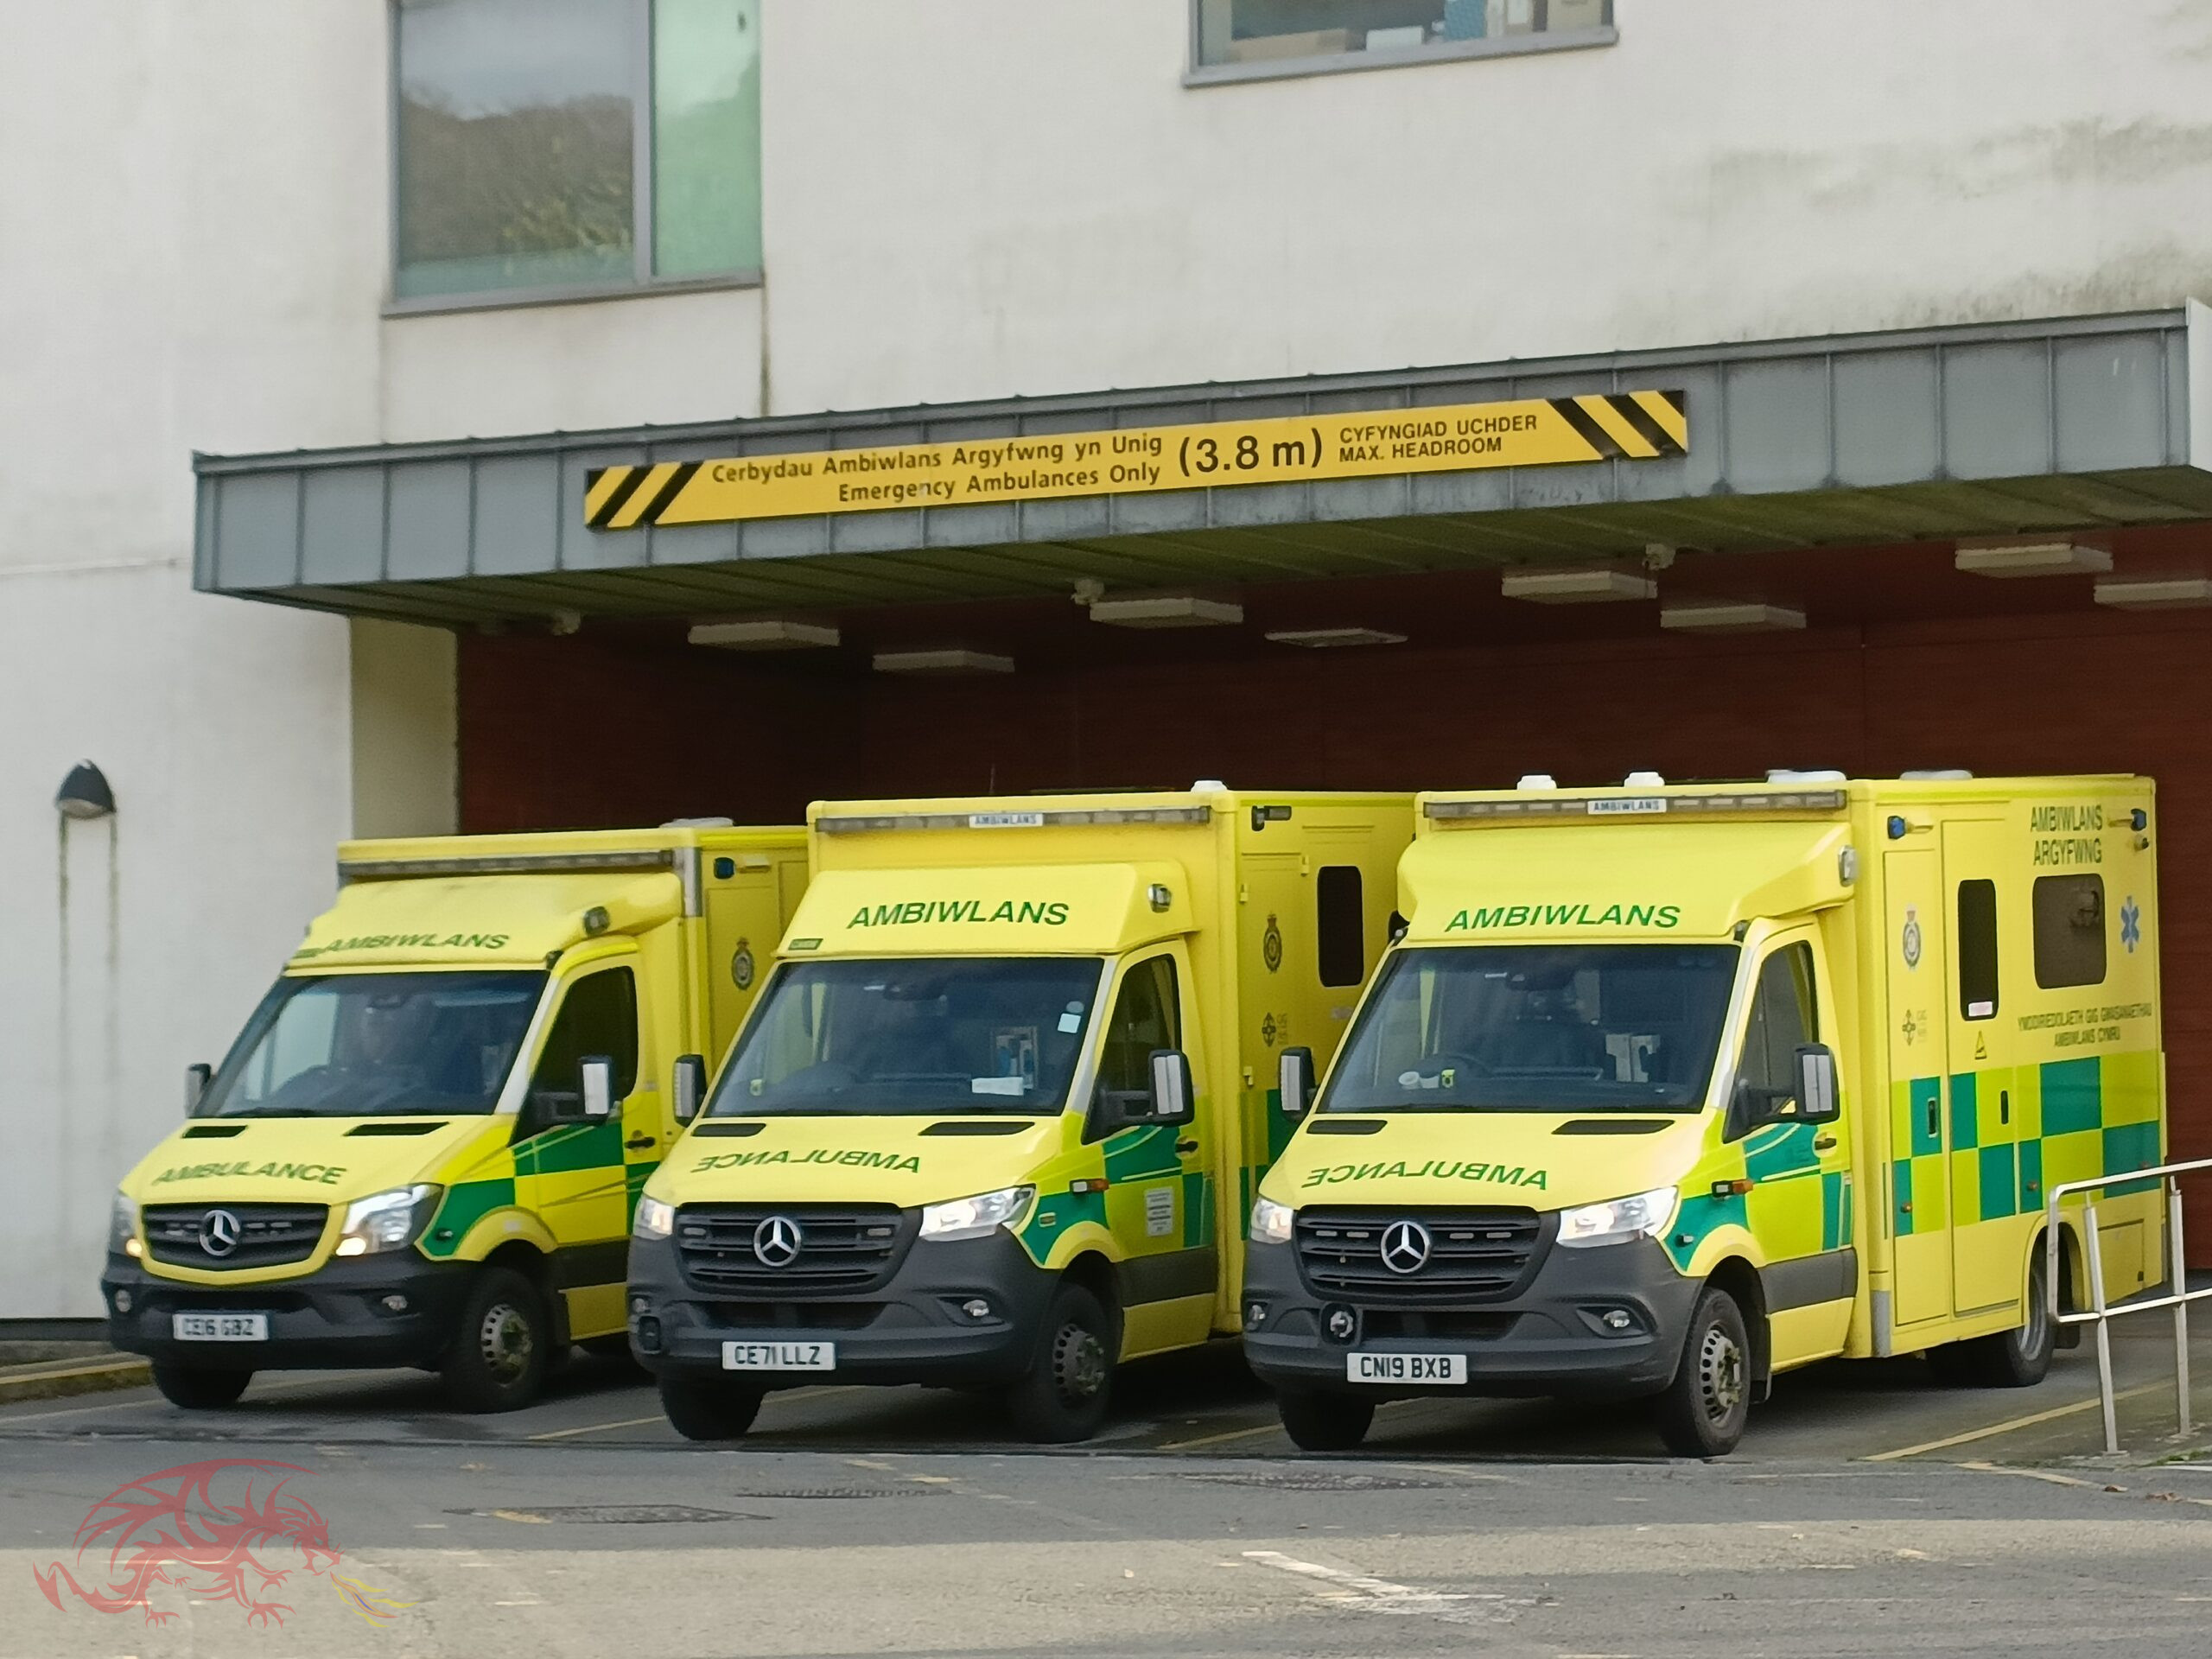 Local areas in Wales with worst ambulance delays as heart attack victims left waiting one hour 57 minutes